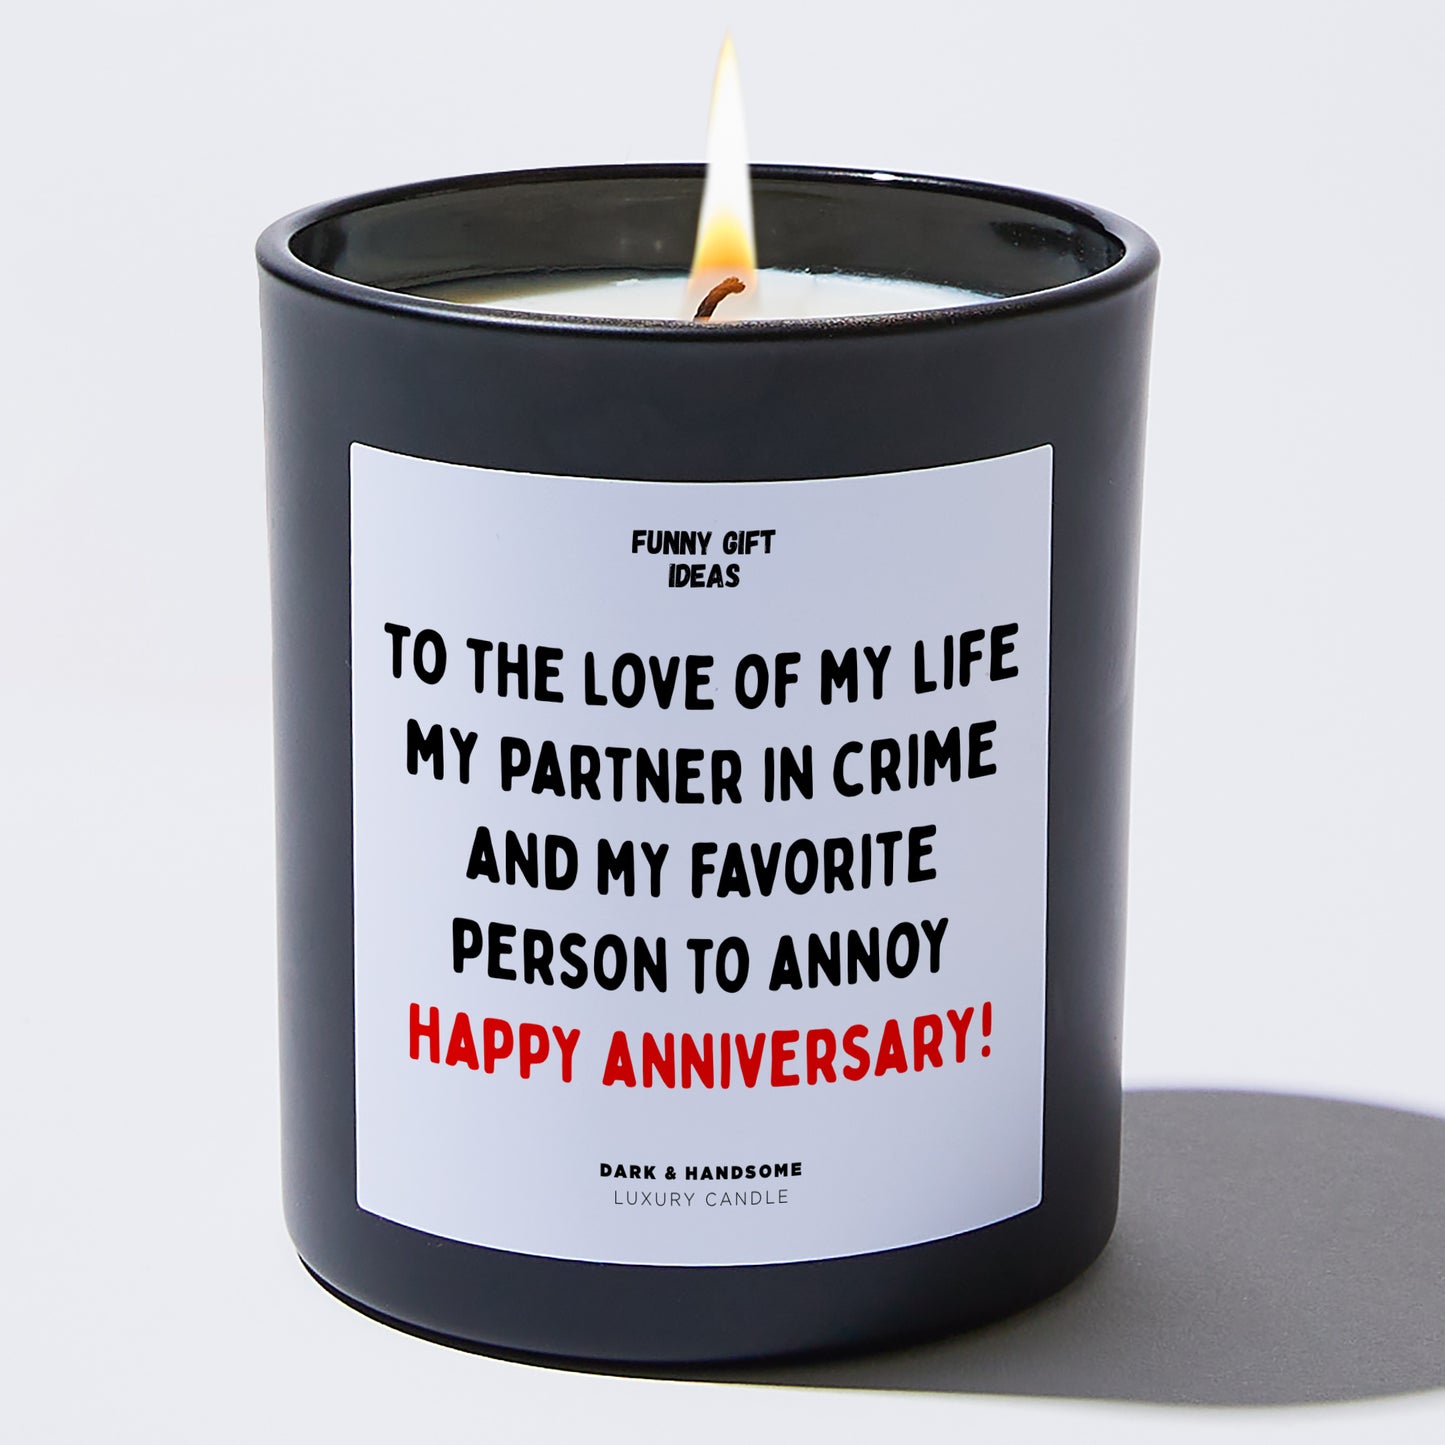 Anniversary Present - To the Love of My Life, My Partner in Crime, and My Favorite Person to Annoy – Happy Anniversary! - Candle